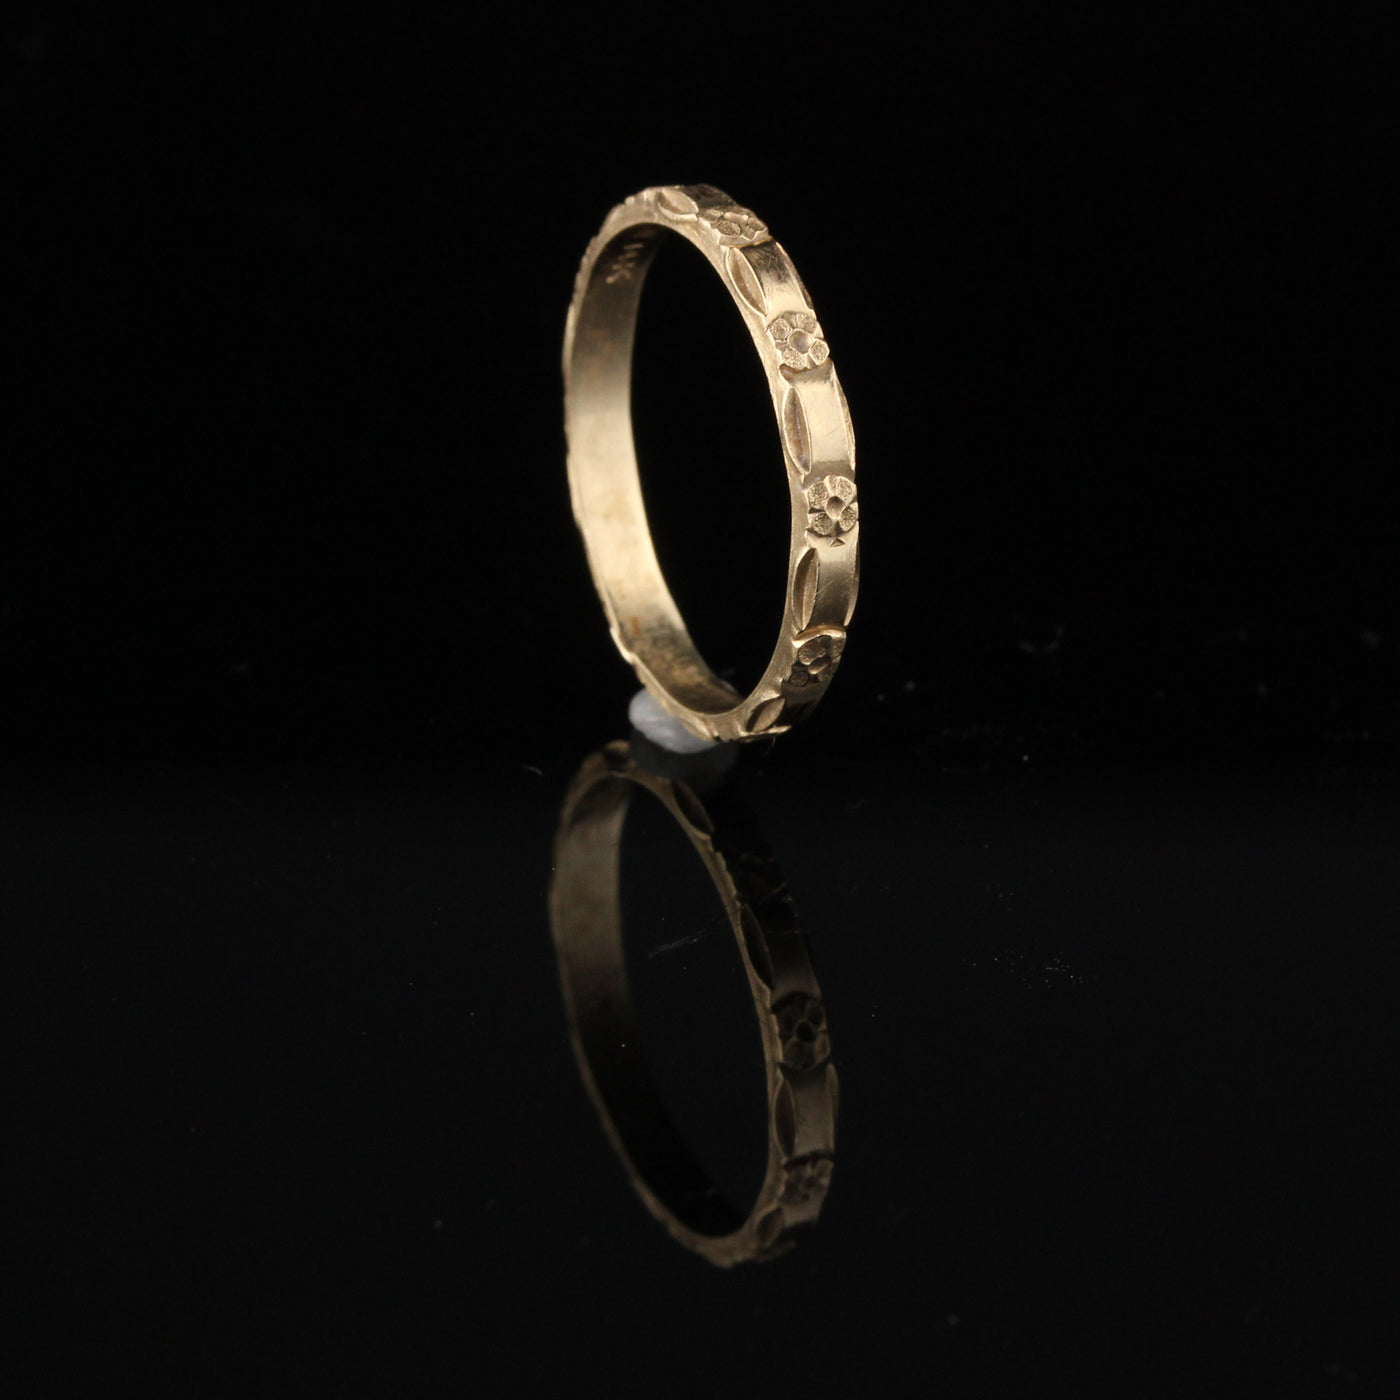 Antique Victorian 14K Yellow Gold Engraved Wedding Band - Size 6